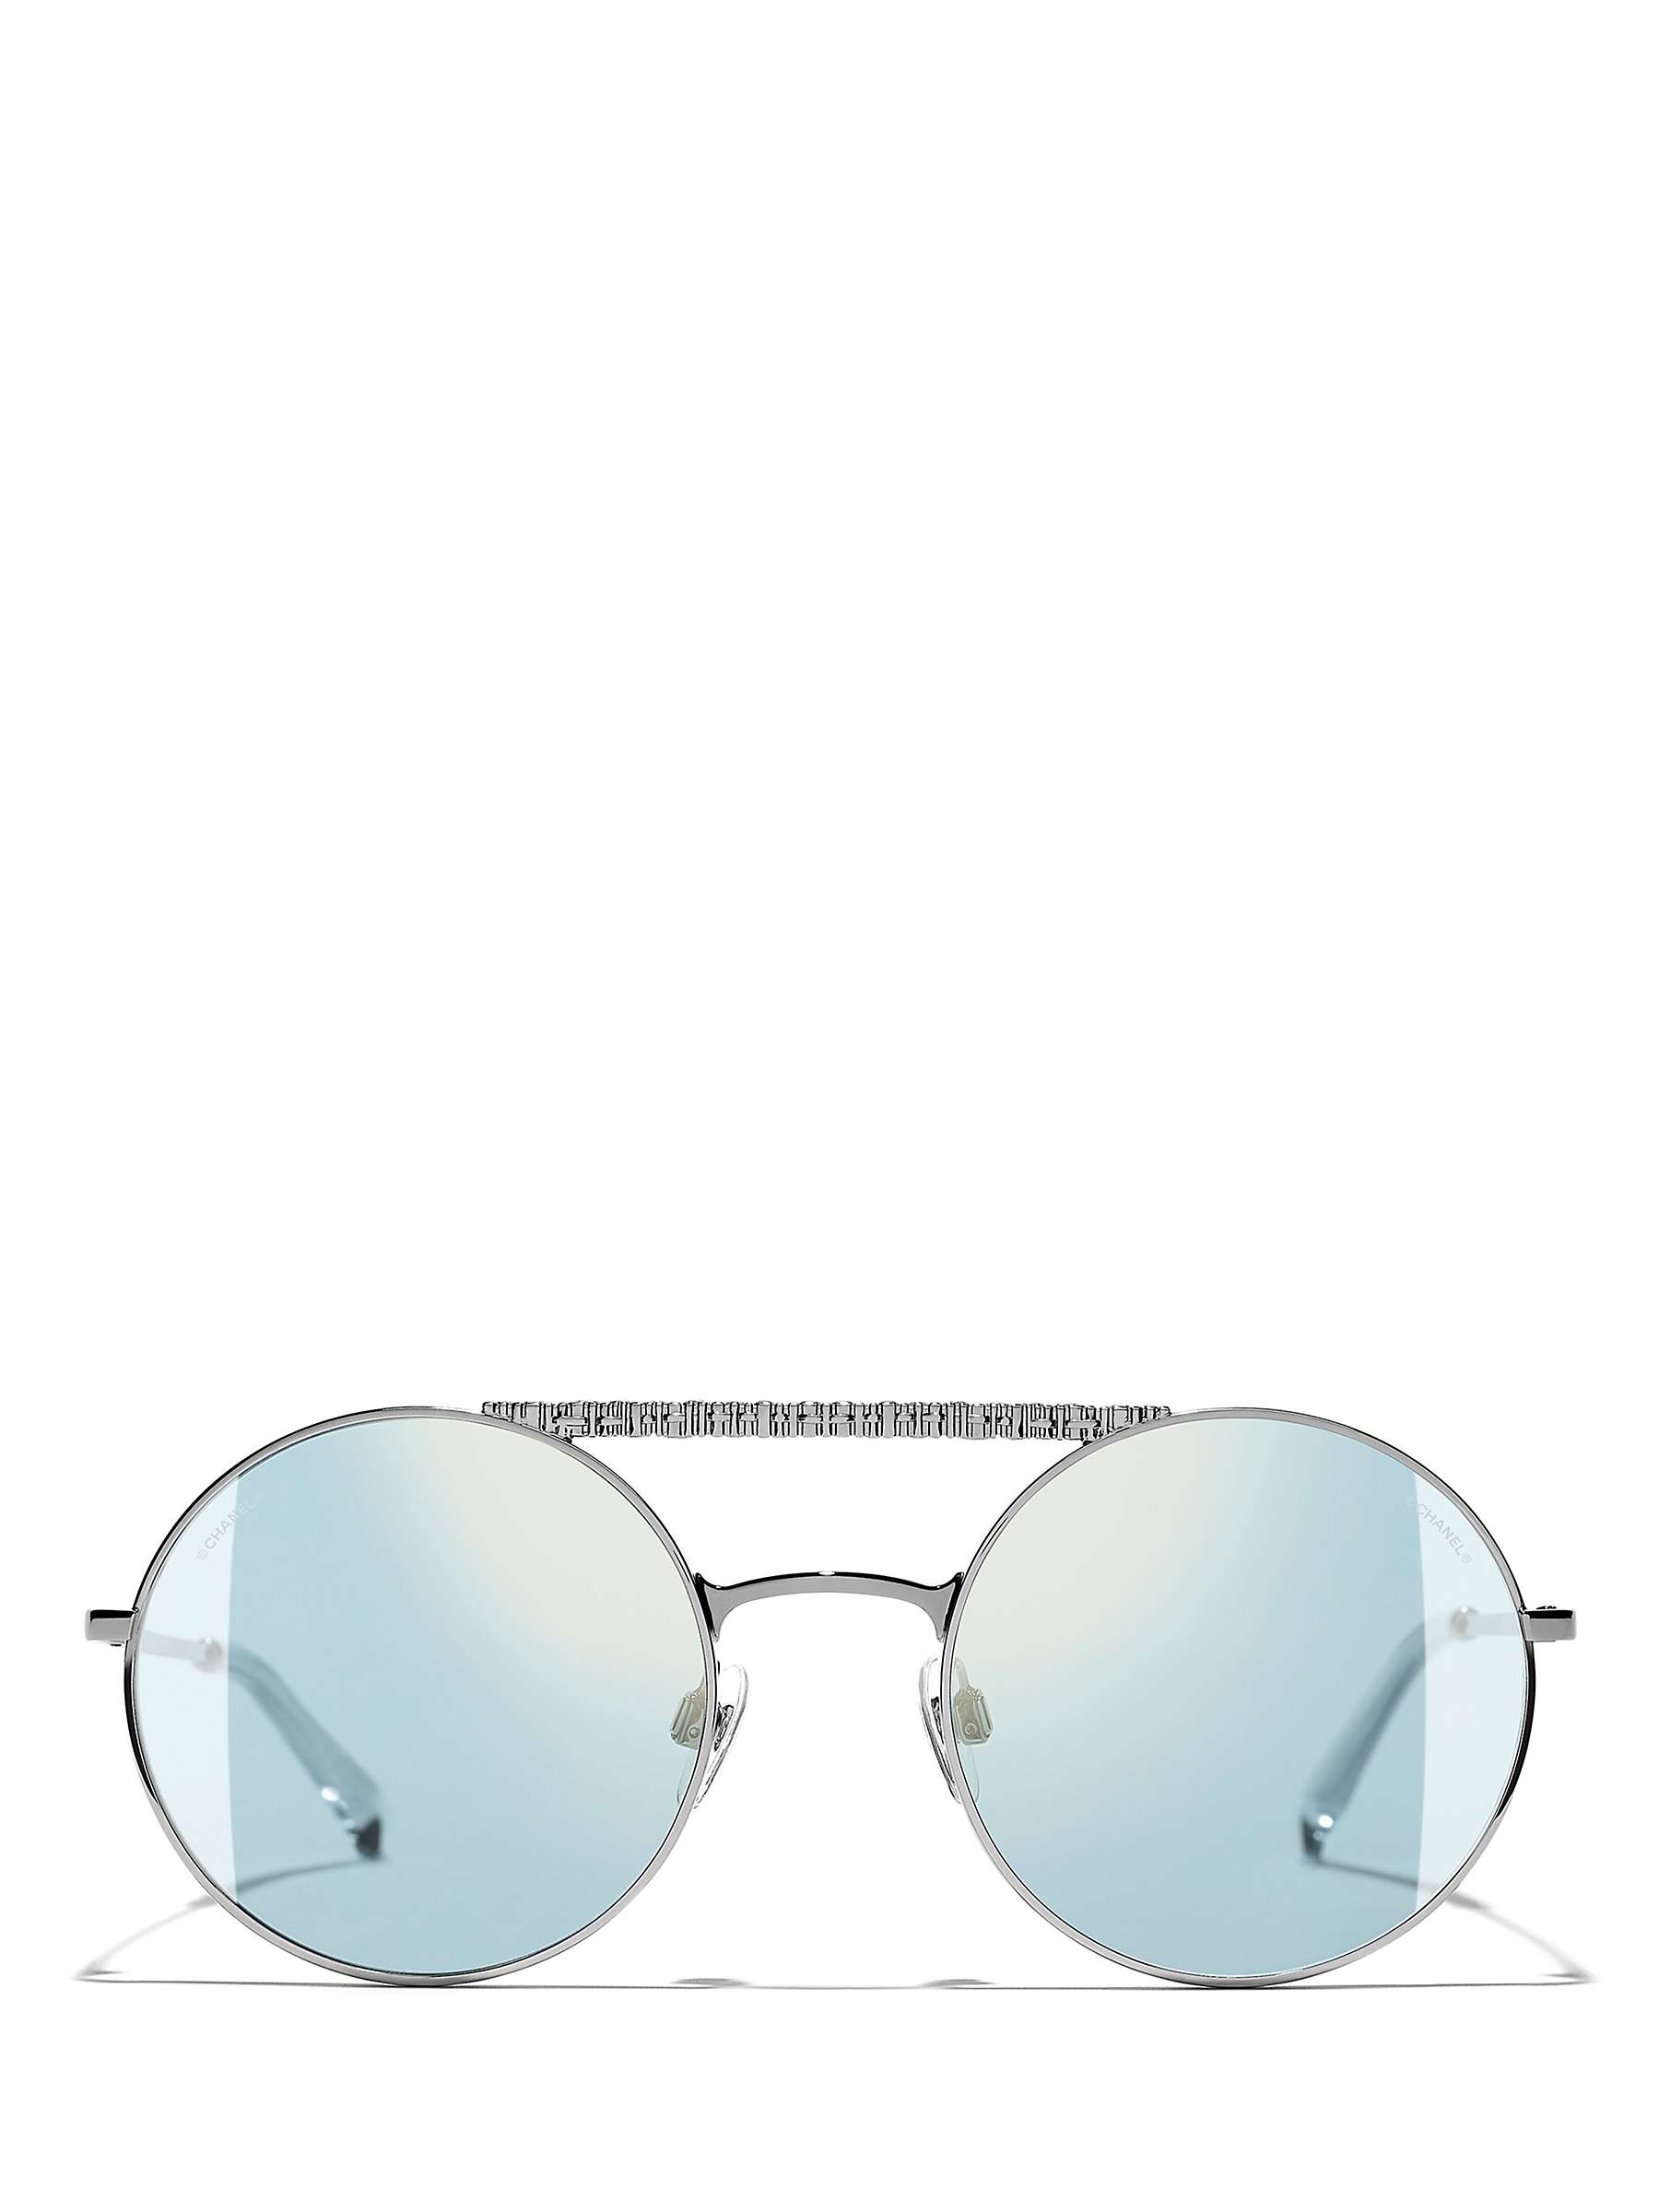 Buy CHANEL Round Sunglasses CH4232 Silver/Blue Online at johnlewis.com